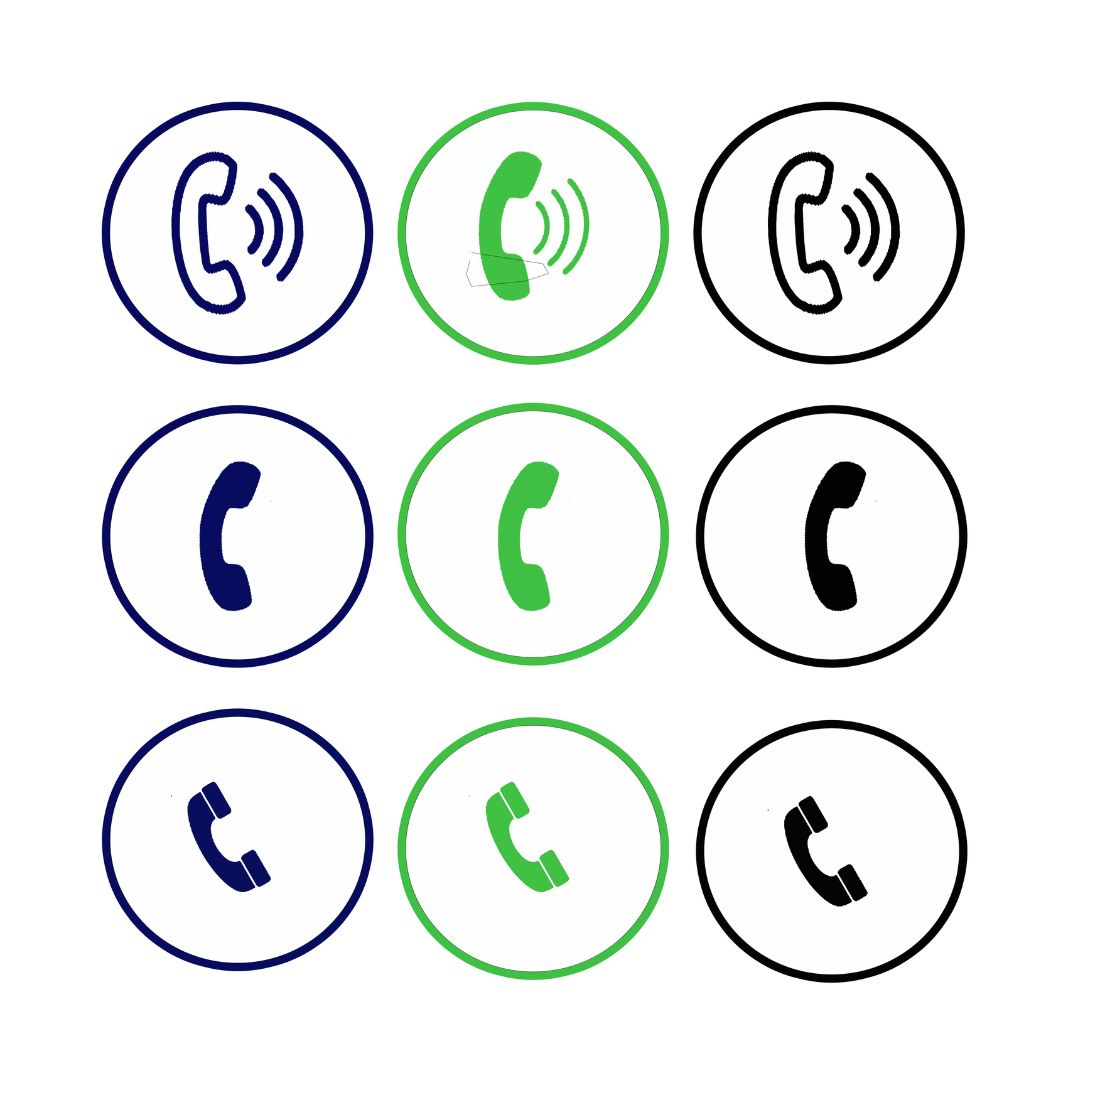 green call button preview image.